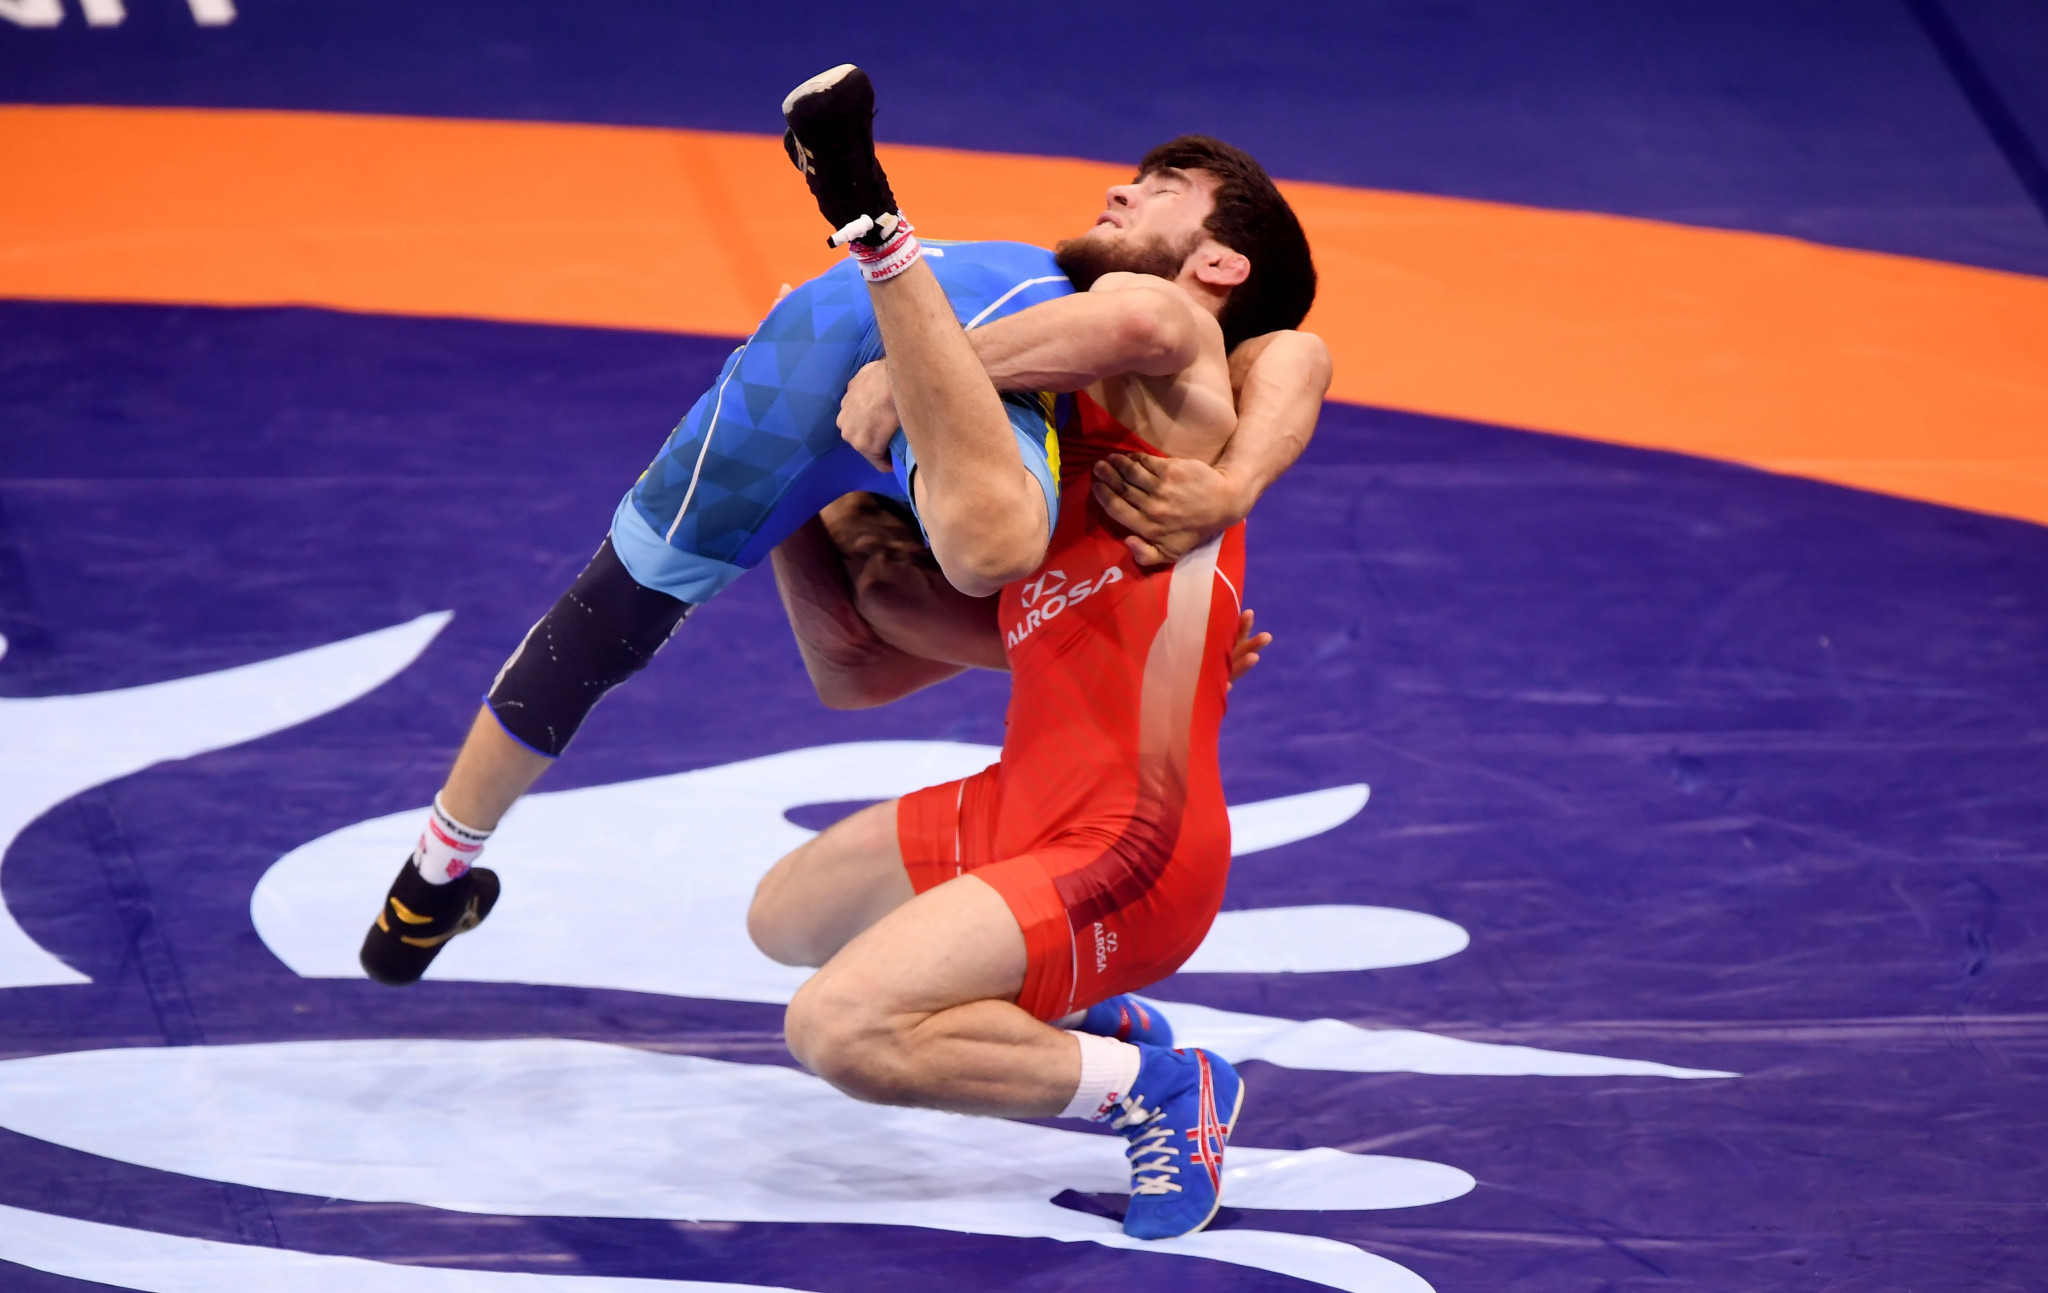  Zavur Uguev, right, won the first gold of the night in the men's freestyle 57kg division ©Getty Images